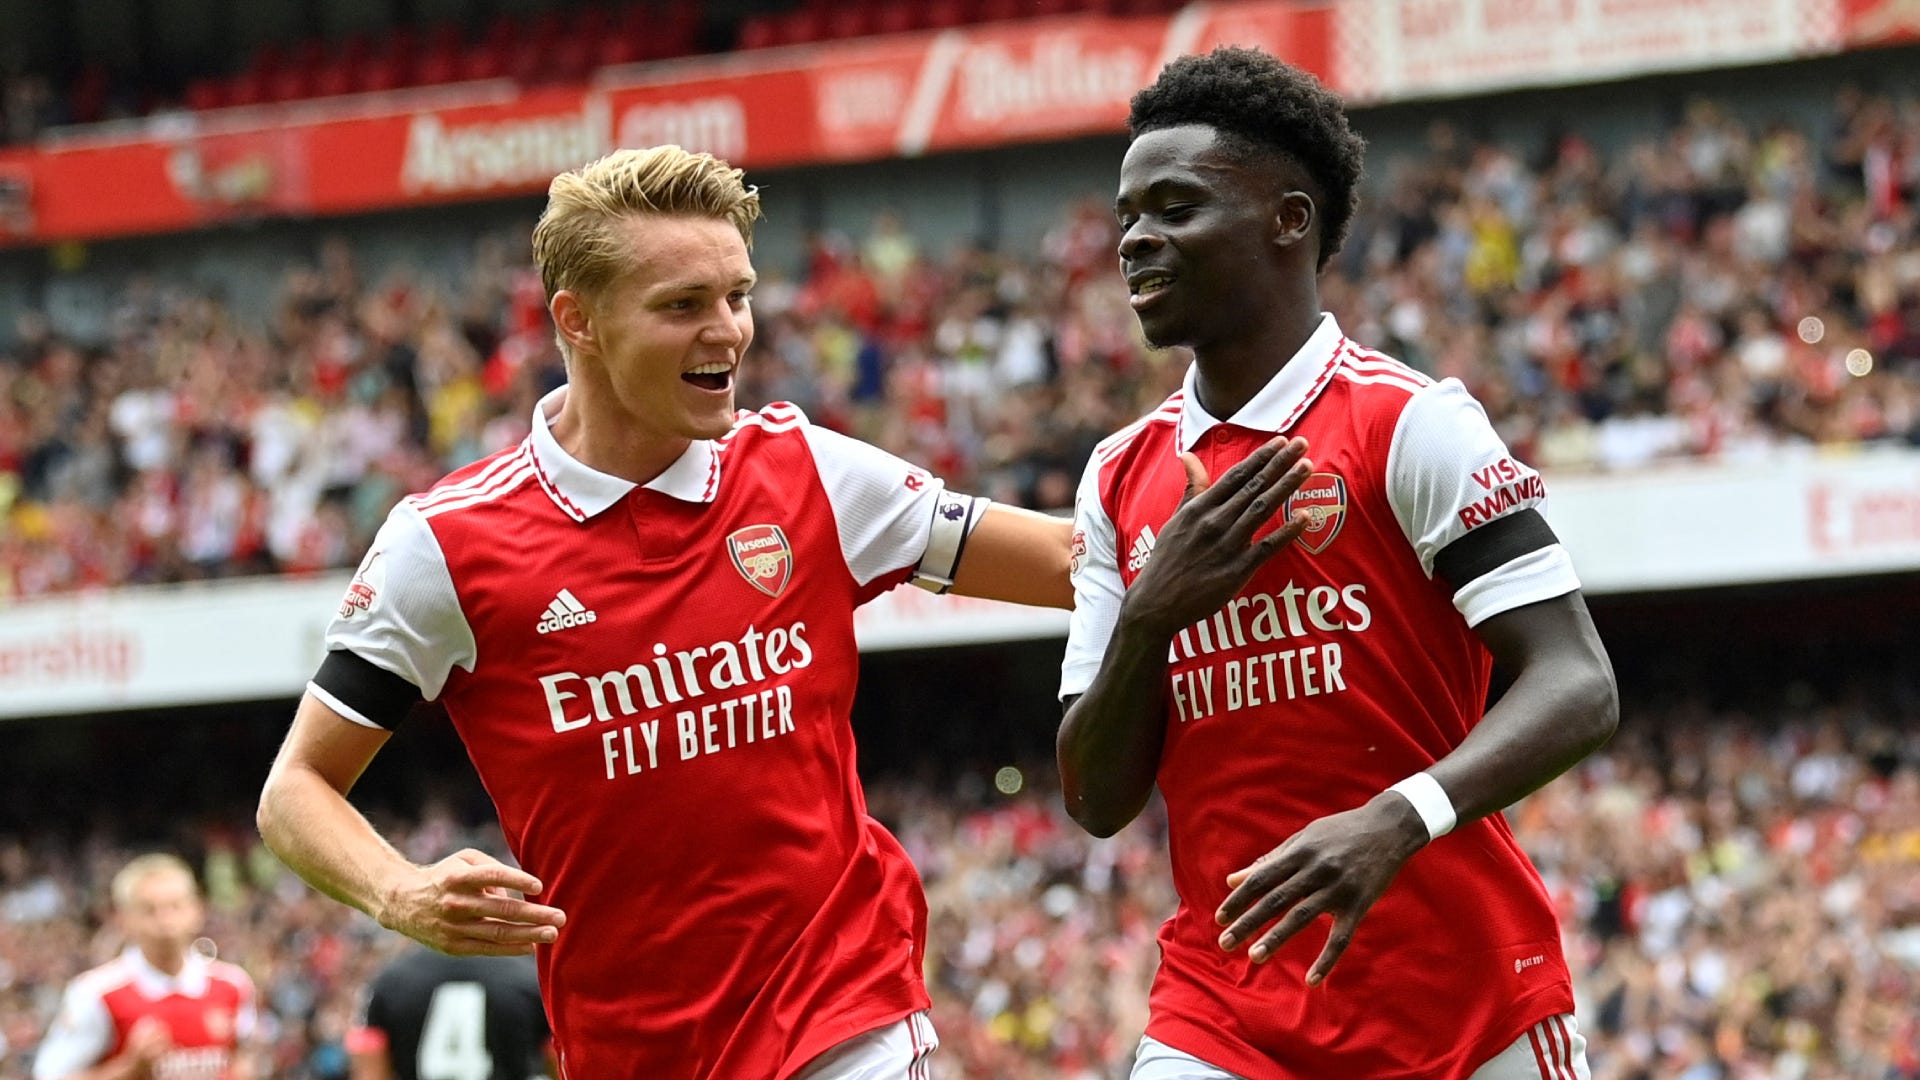 Oxford United vs Arsenal Live stream, TV channel, kick-off time and where to watch Goal Kenya